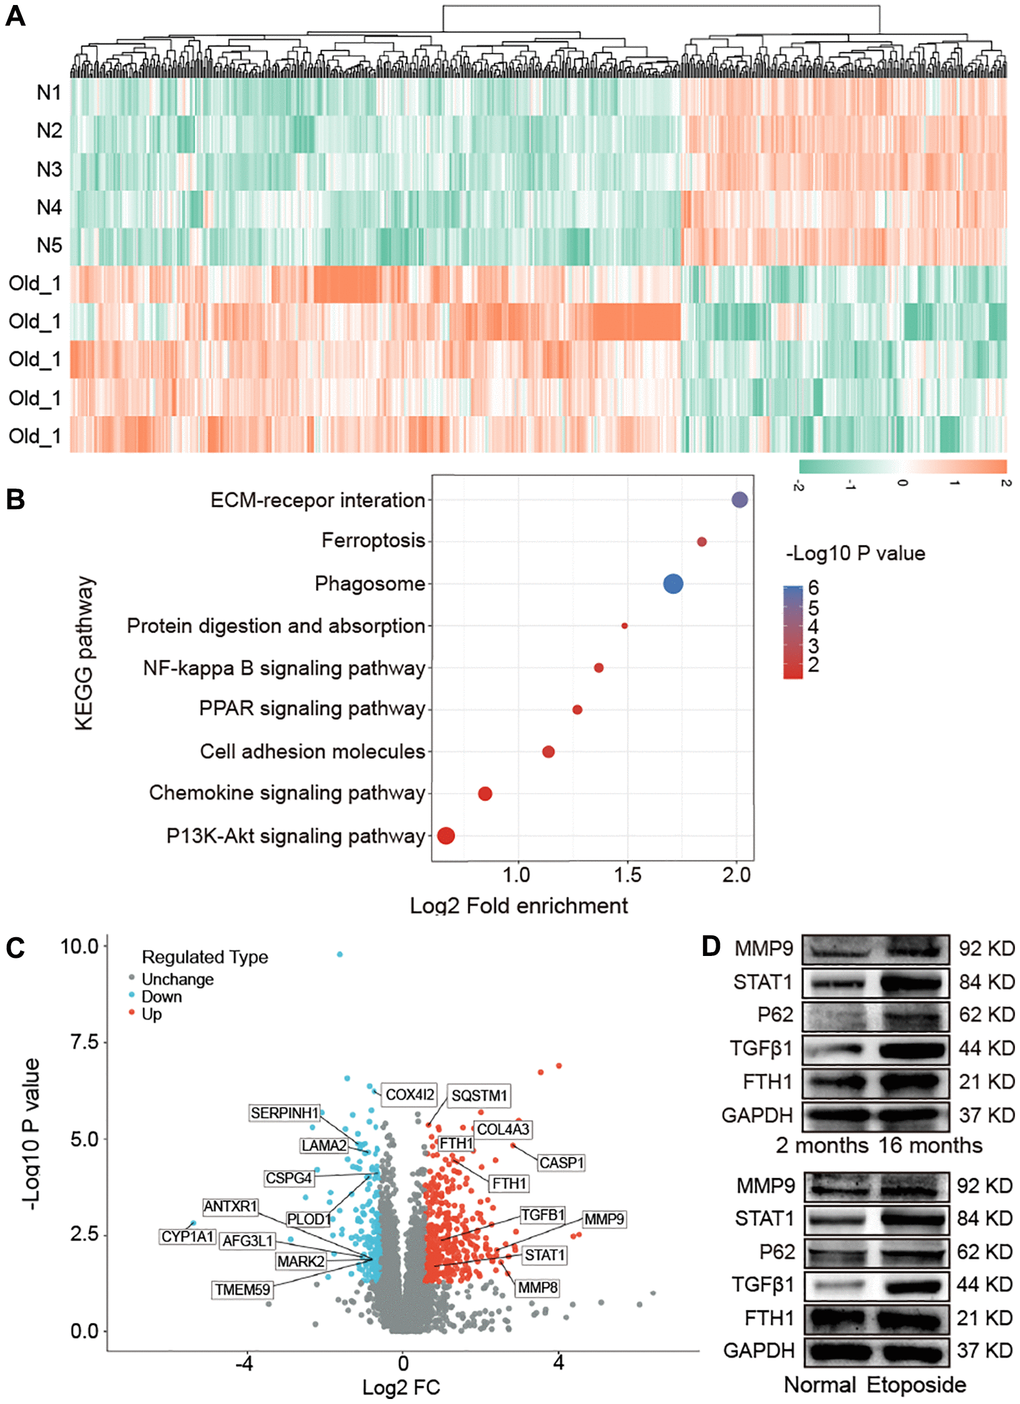 Impact of aging on mouse lung proteomics. (A) Hierarchical clustering of protein analysis. Blue to red indicate low-to-high expression levels. (B) KEGG pathway analysis exhibited that the screened differentially expressed proteins were enriched in pathways including ECM−receptor interaction, ferroptosis, phagosome, protein digestion and absorption, NF-kappa B signaling pathway, PPAR signaling pathway, and cell adhesion molecules. (C) Differentially expressed proteins related to ferroptosis, autophagy, mitochondria, and fibrosis were screened. (D) Western blot assay identified that the expression levels of FTH1, TGFβ1, P62, STAT1, MMP9 increased in aging mice compared with those in young mice. The in vitro result was consistent with the in vivo one.